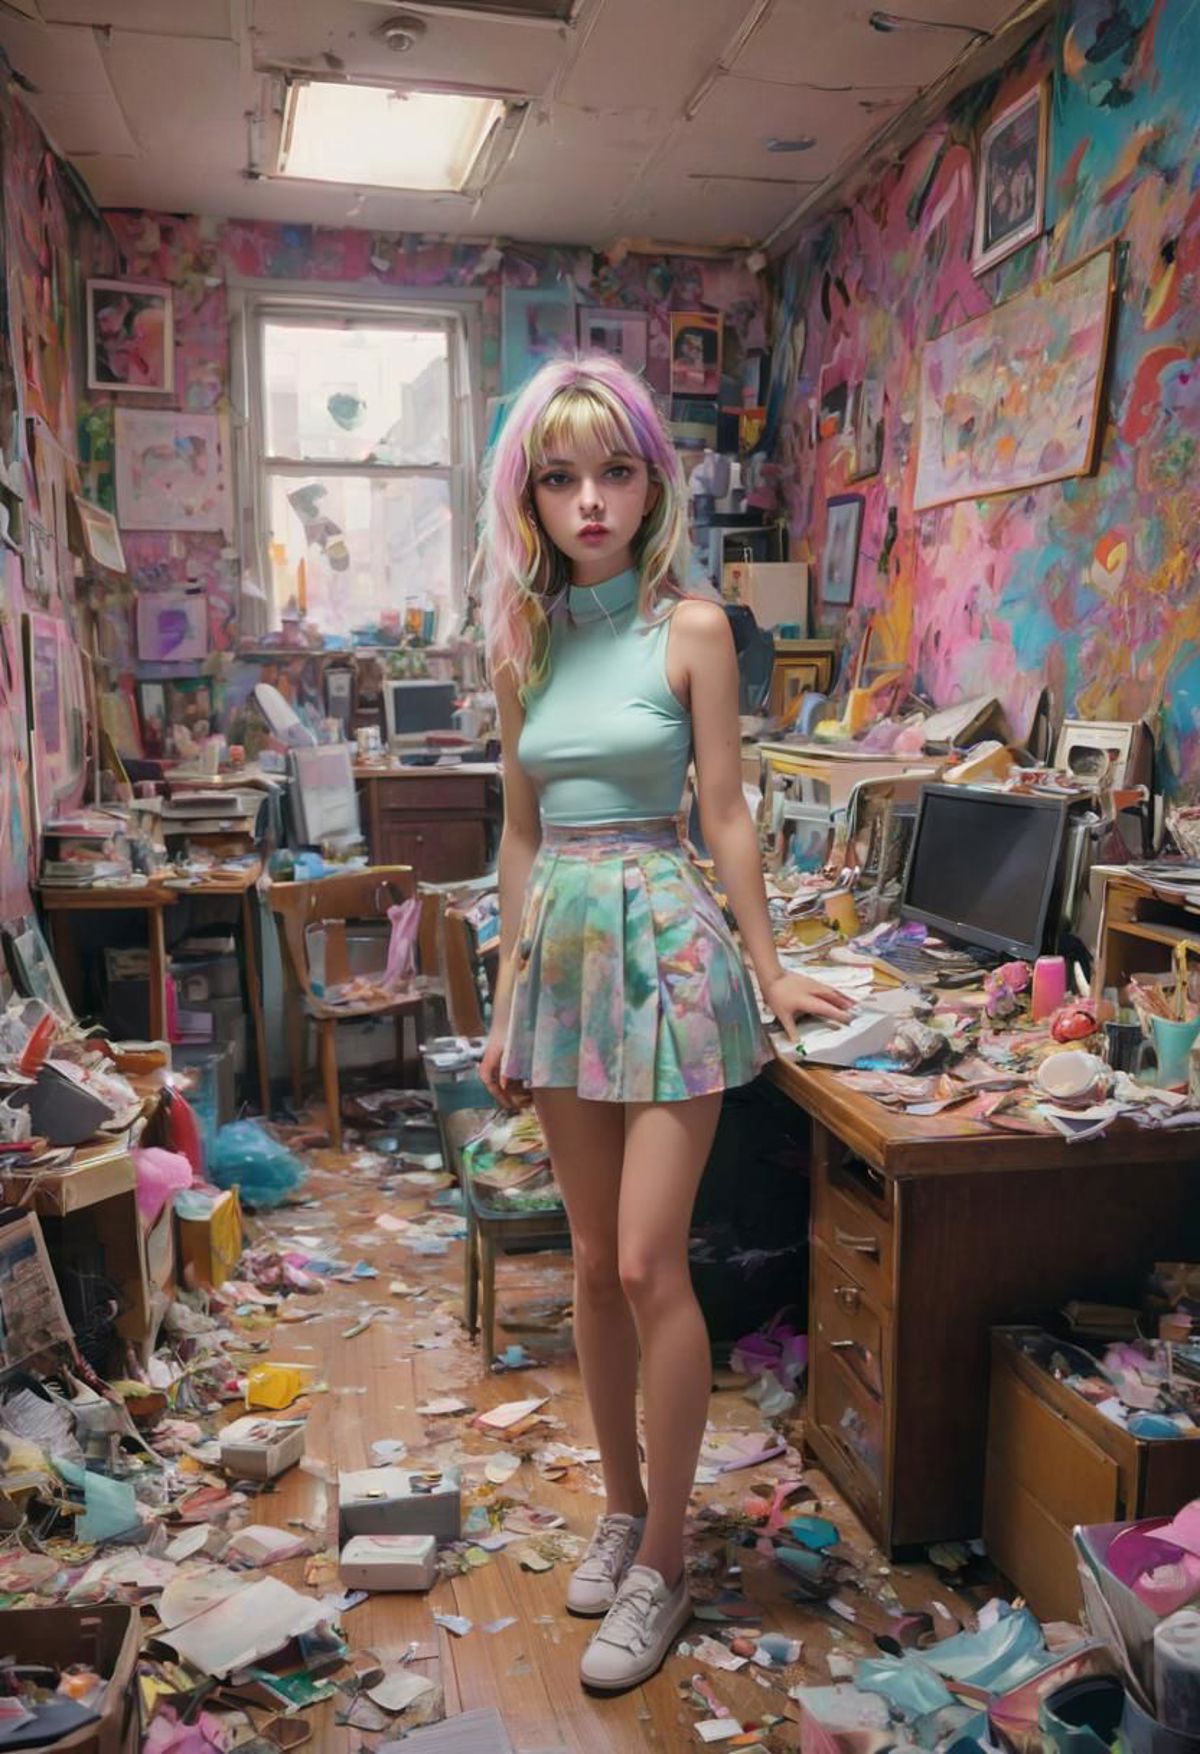 "A Woman in a Blue Skirt Standing in a Messy Art Studio"